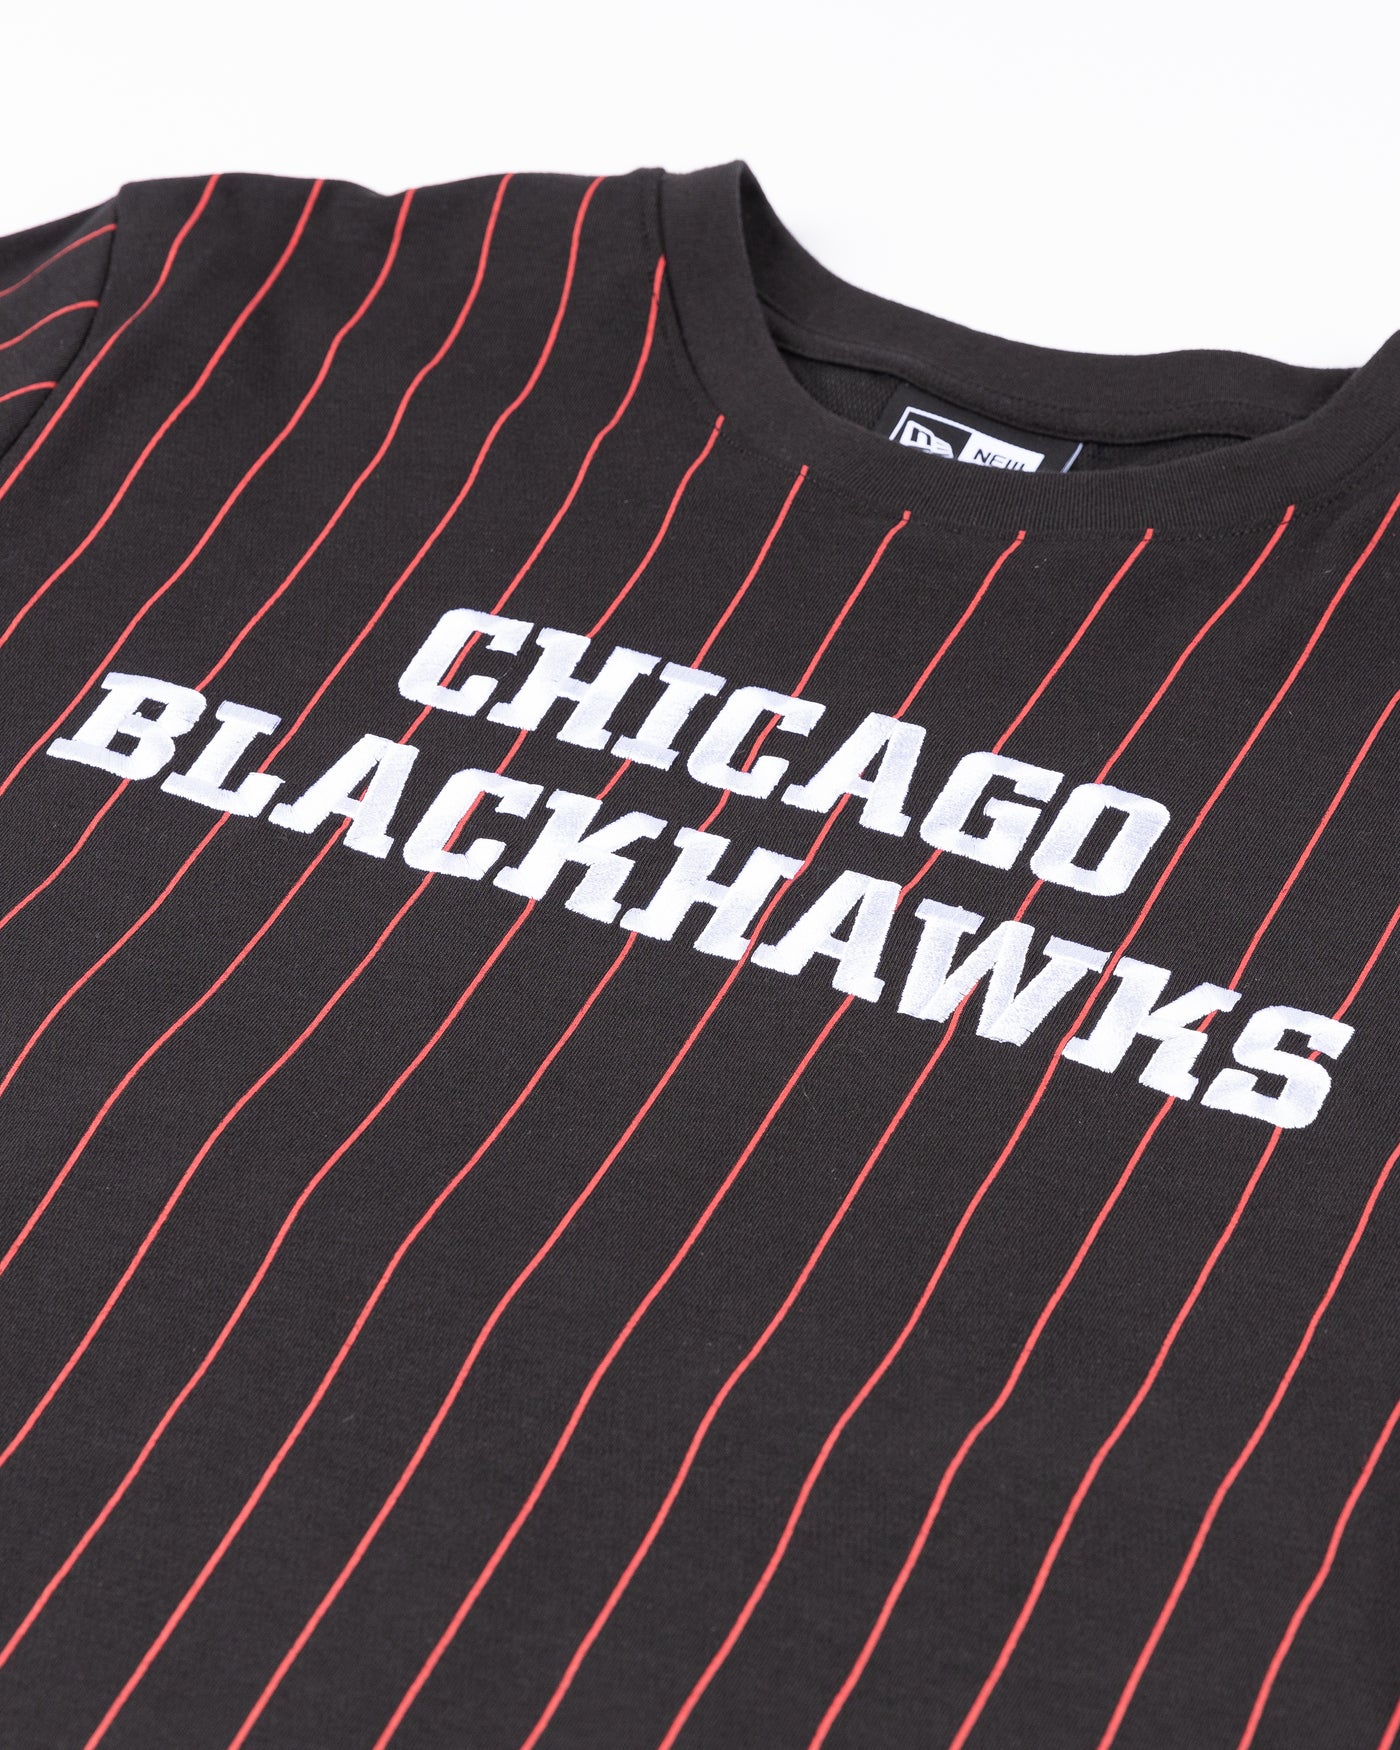 black New Era tee with red pinstripes and Chicago Blackhawks wordmark embroidered on front and primary logo printed on back - front detail lay flat